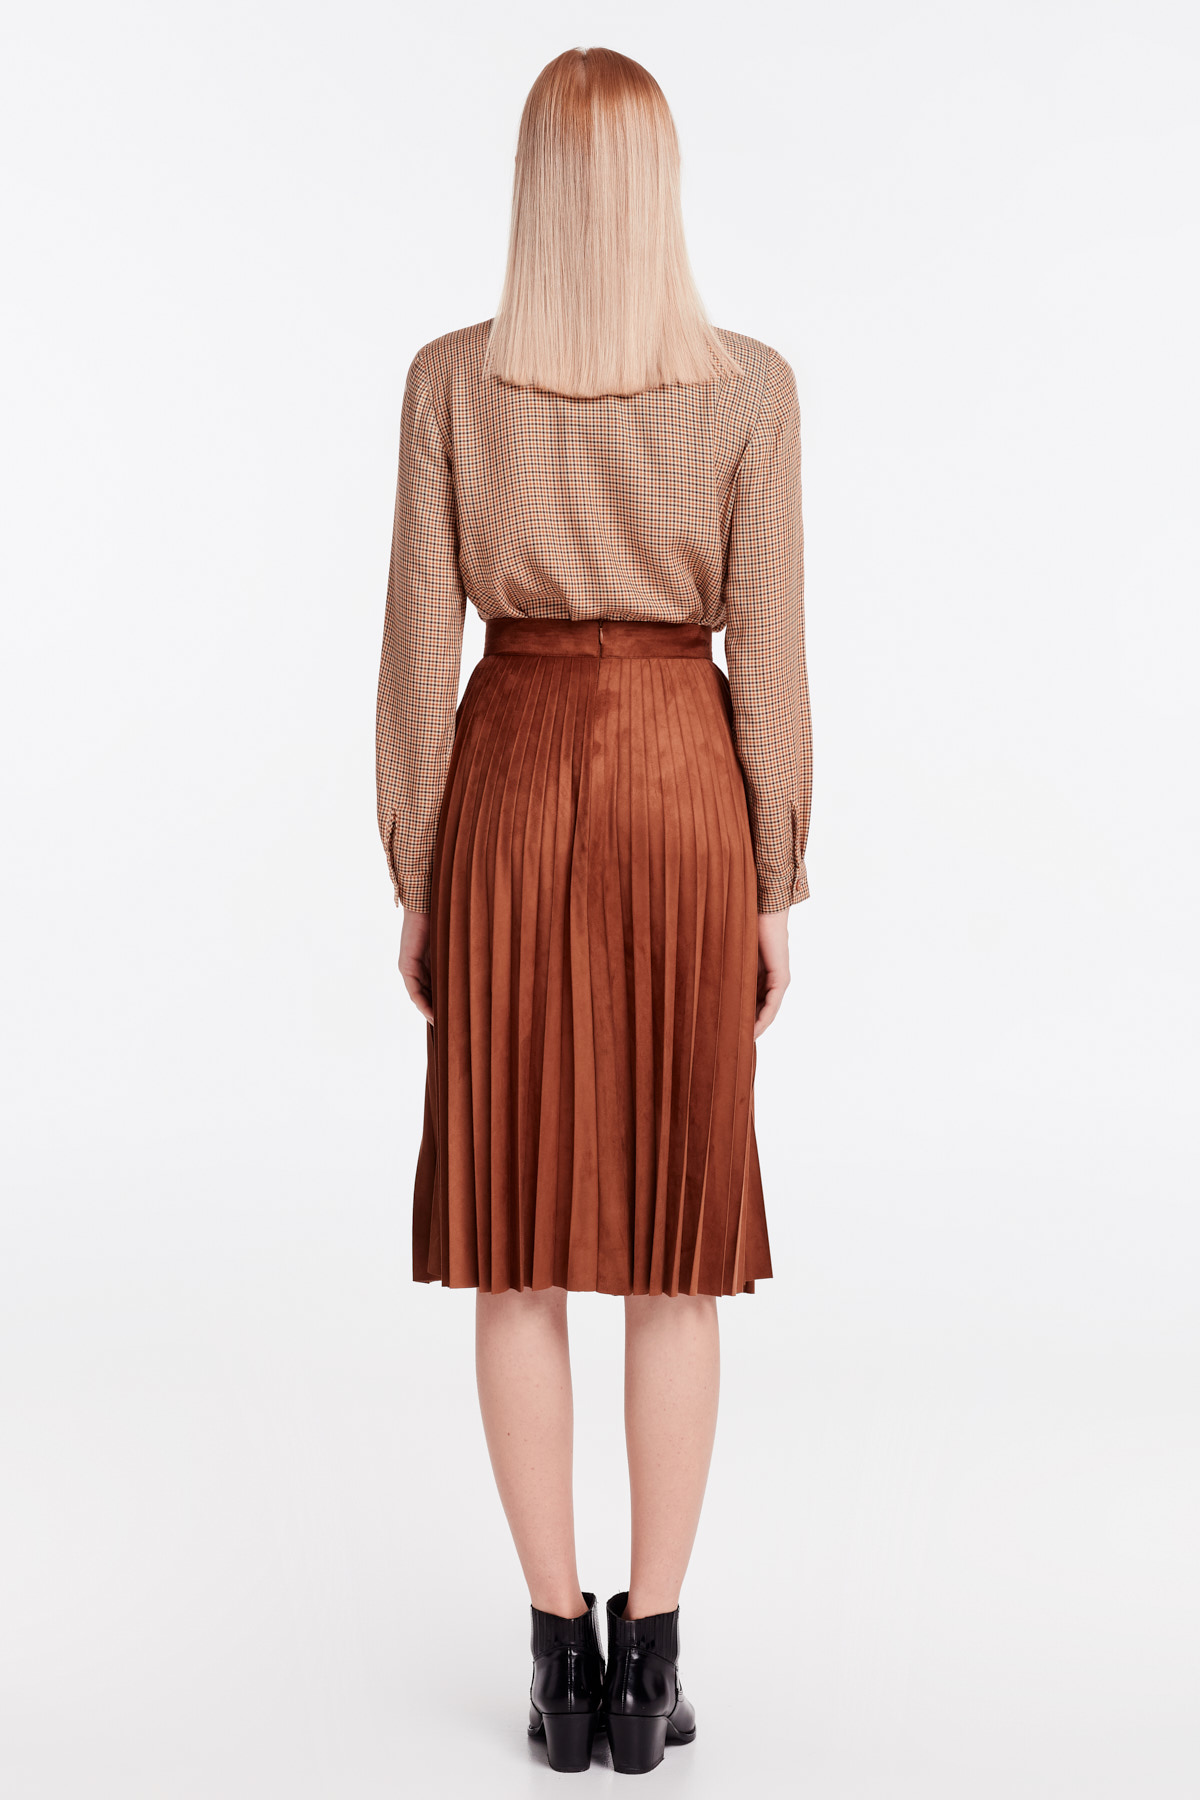 Brown suede pleated skirt, photo 8